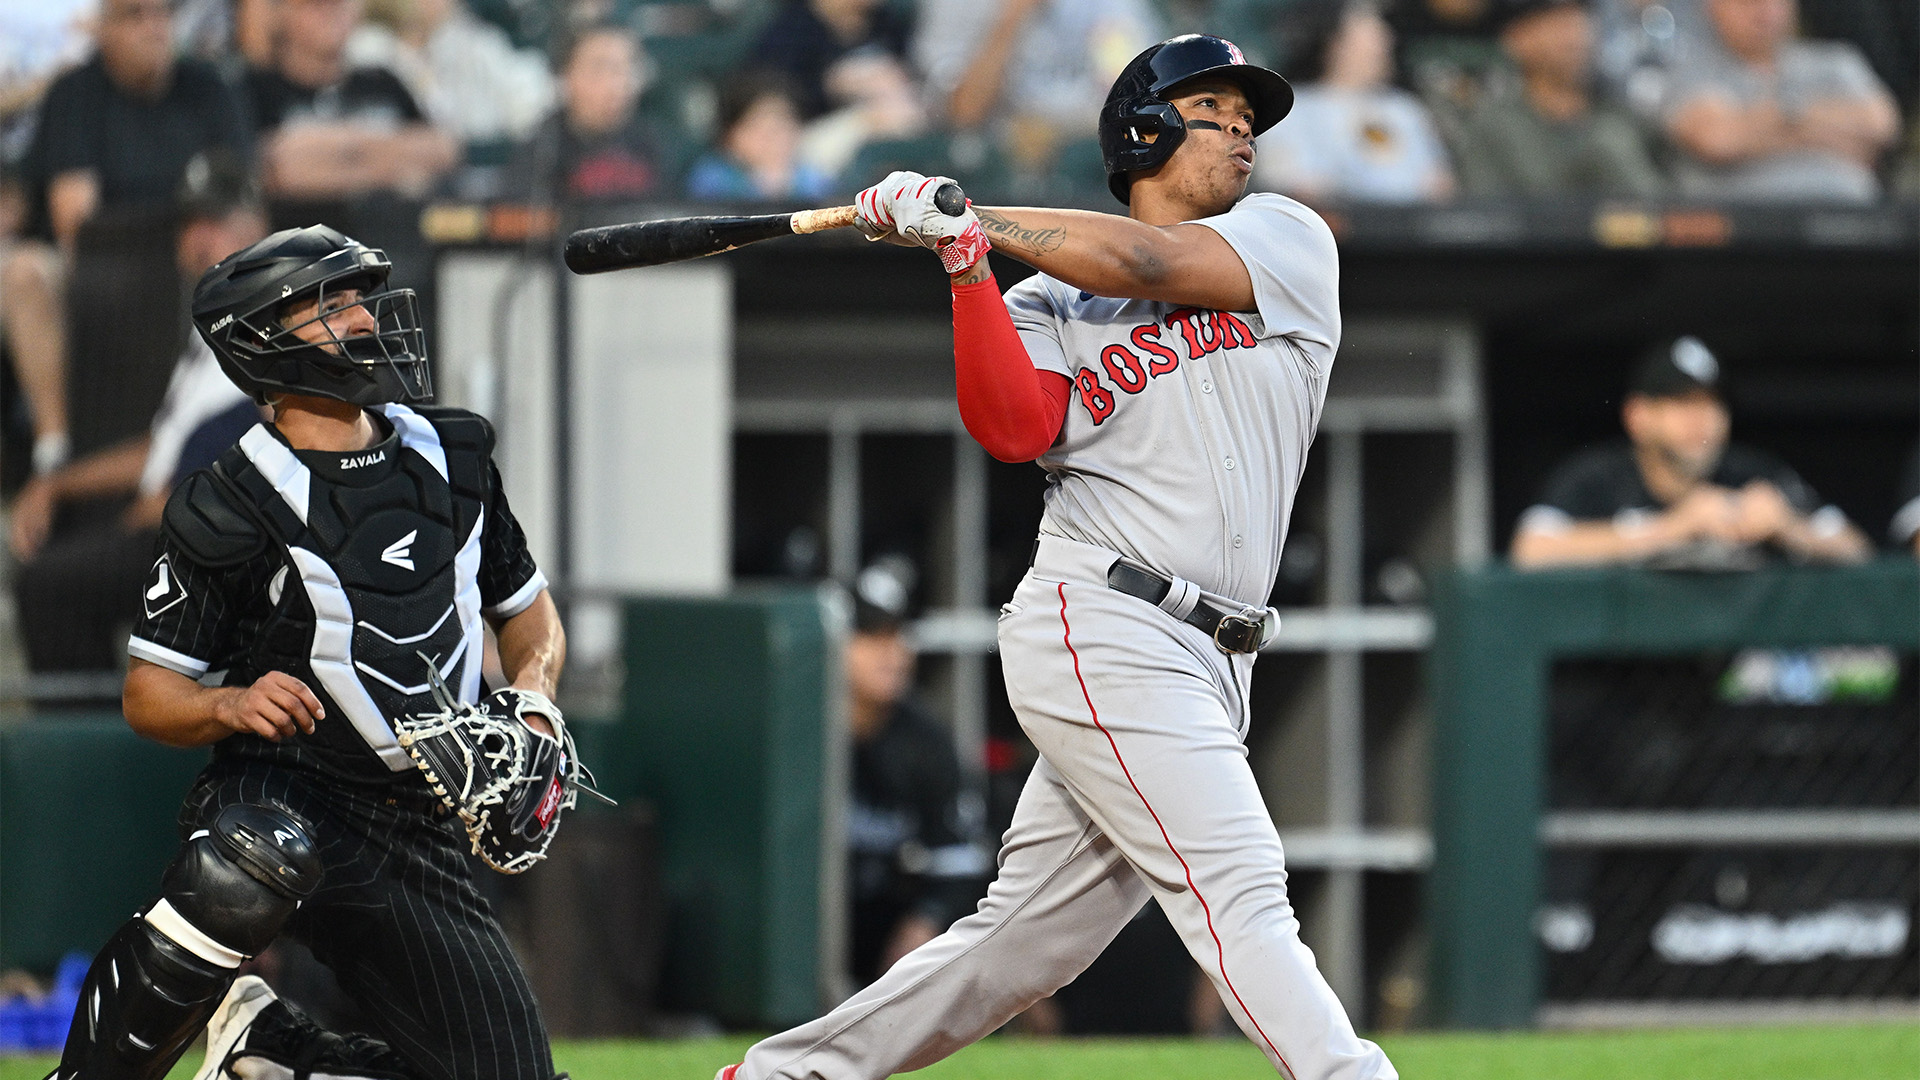 Rafael Devers Ties League Lead For RBIs After Two-Run Blast Vs. White
Sox